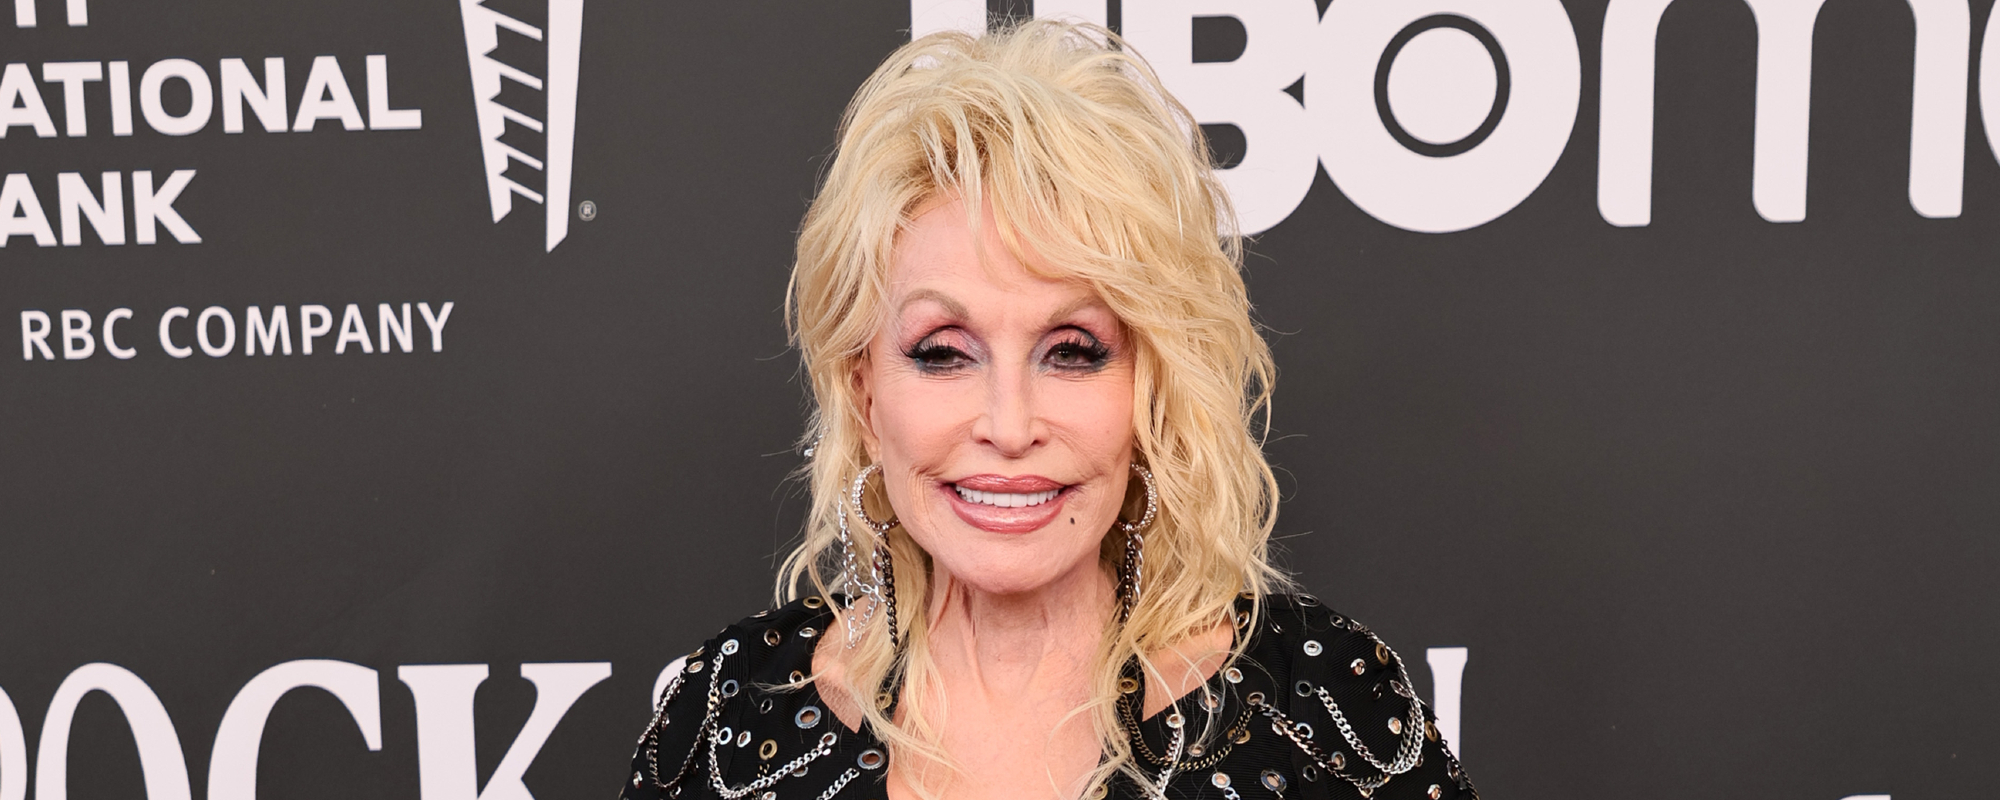 Watch Willie Nelson Duet With Dolly Parton for a Very ‘Happy Happy, Birthday’ Throwback Performance